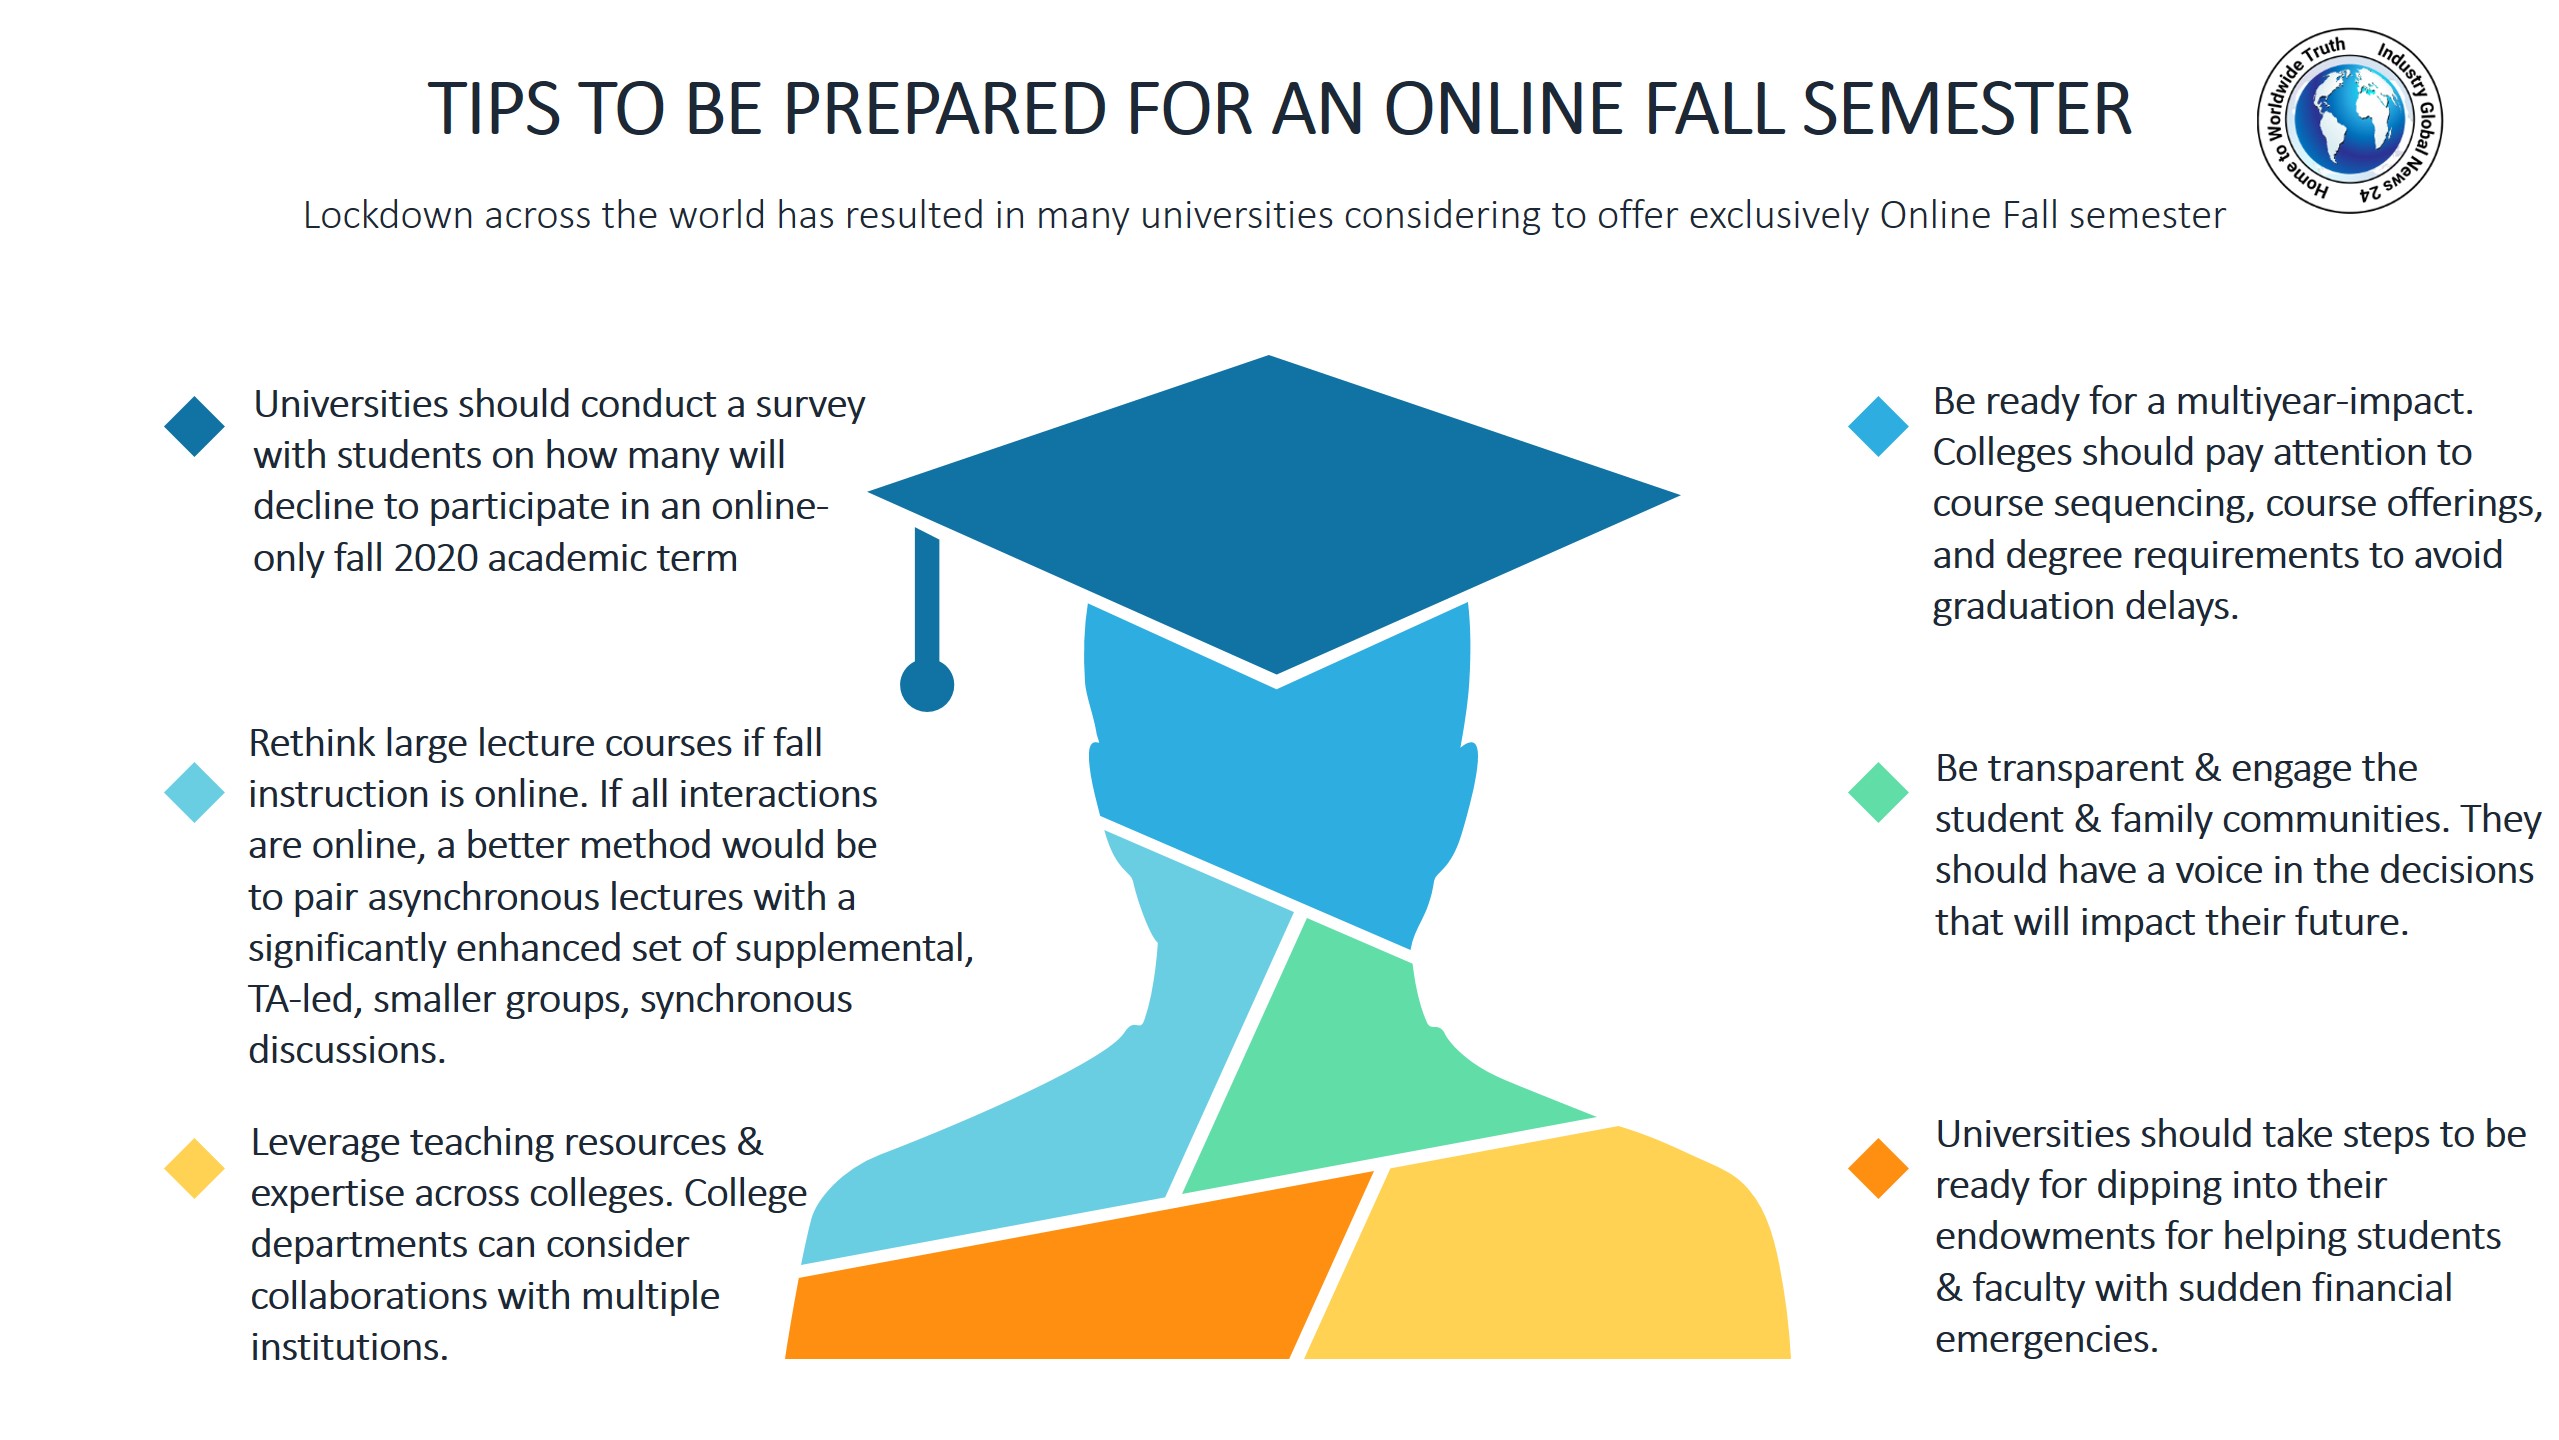 Tips to be prepared for an Online Fall semester